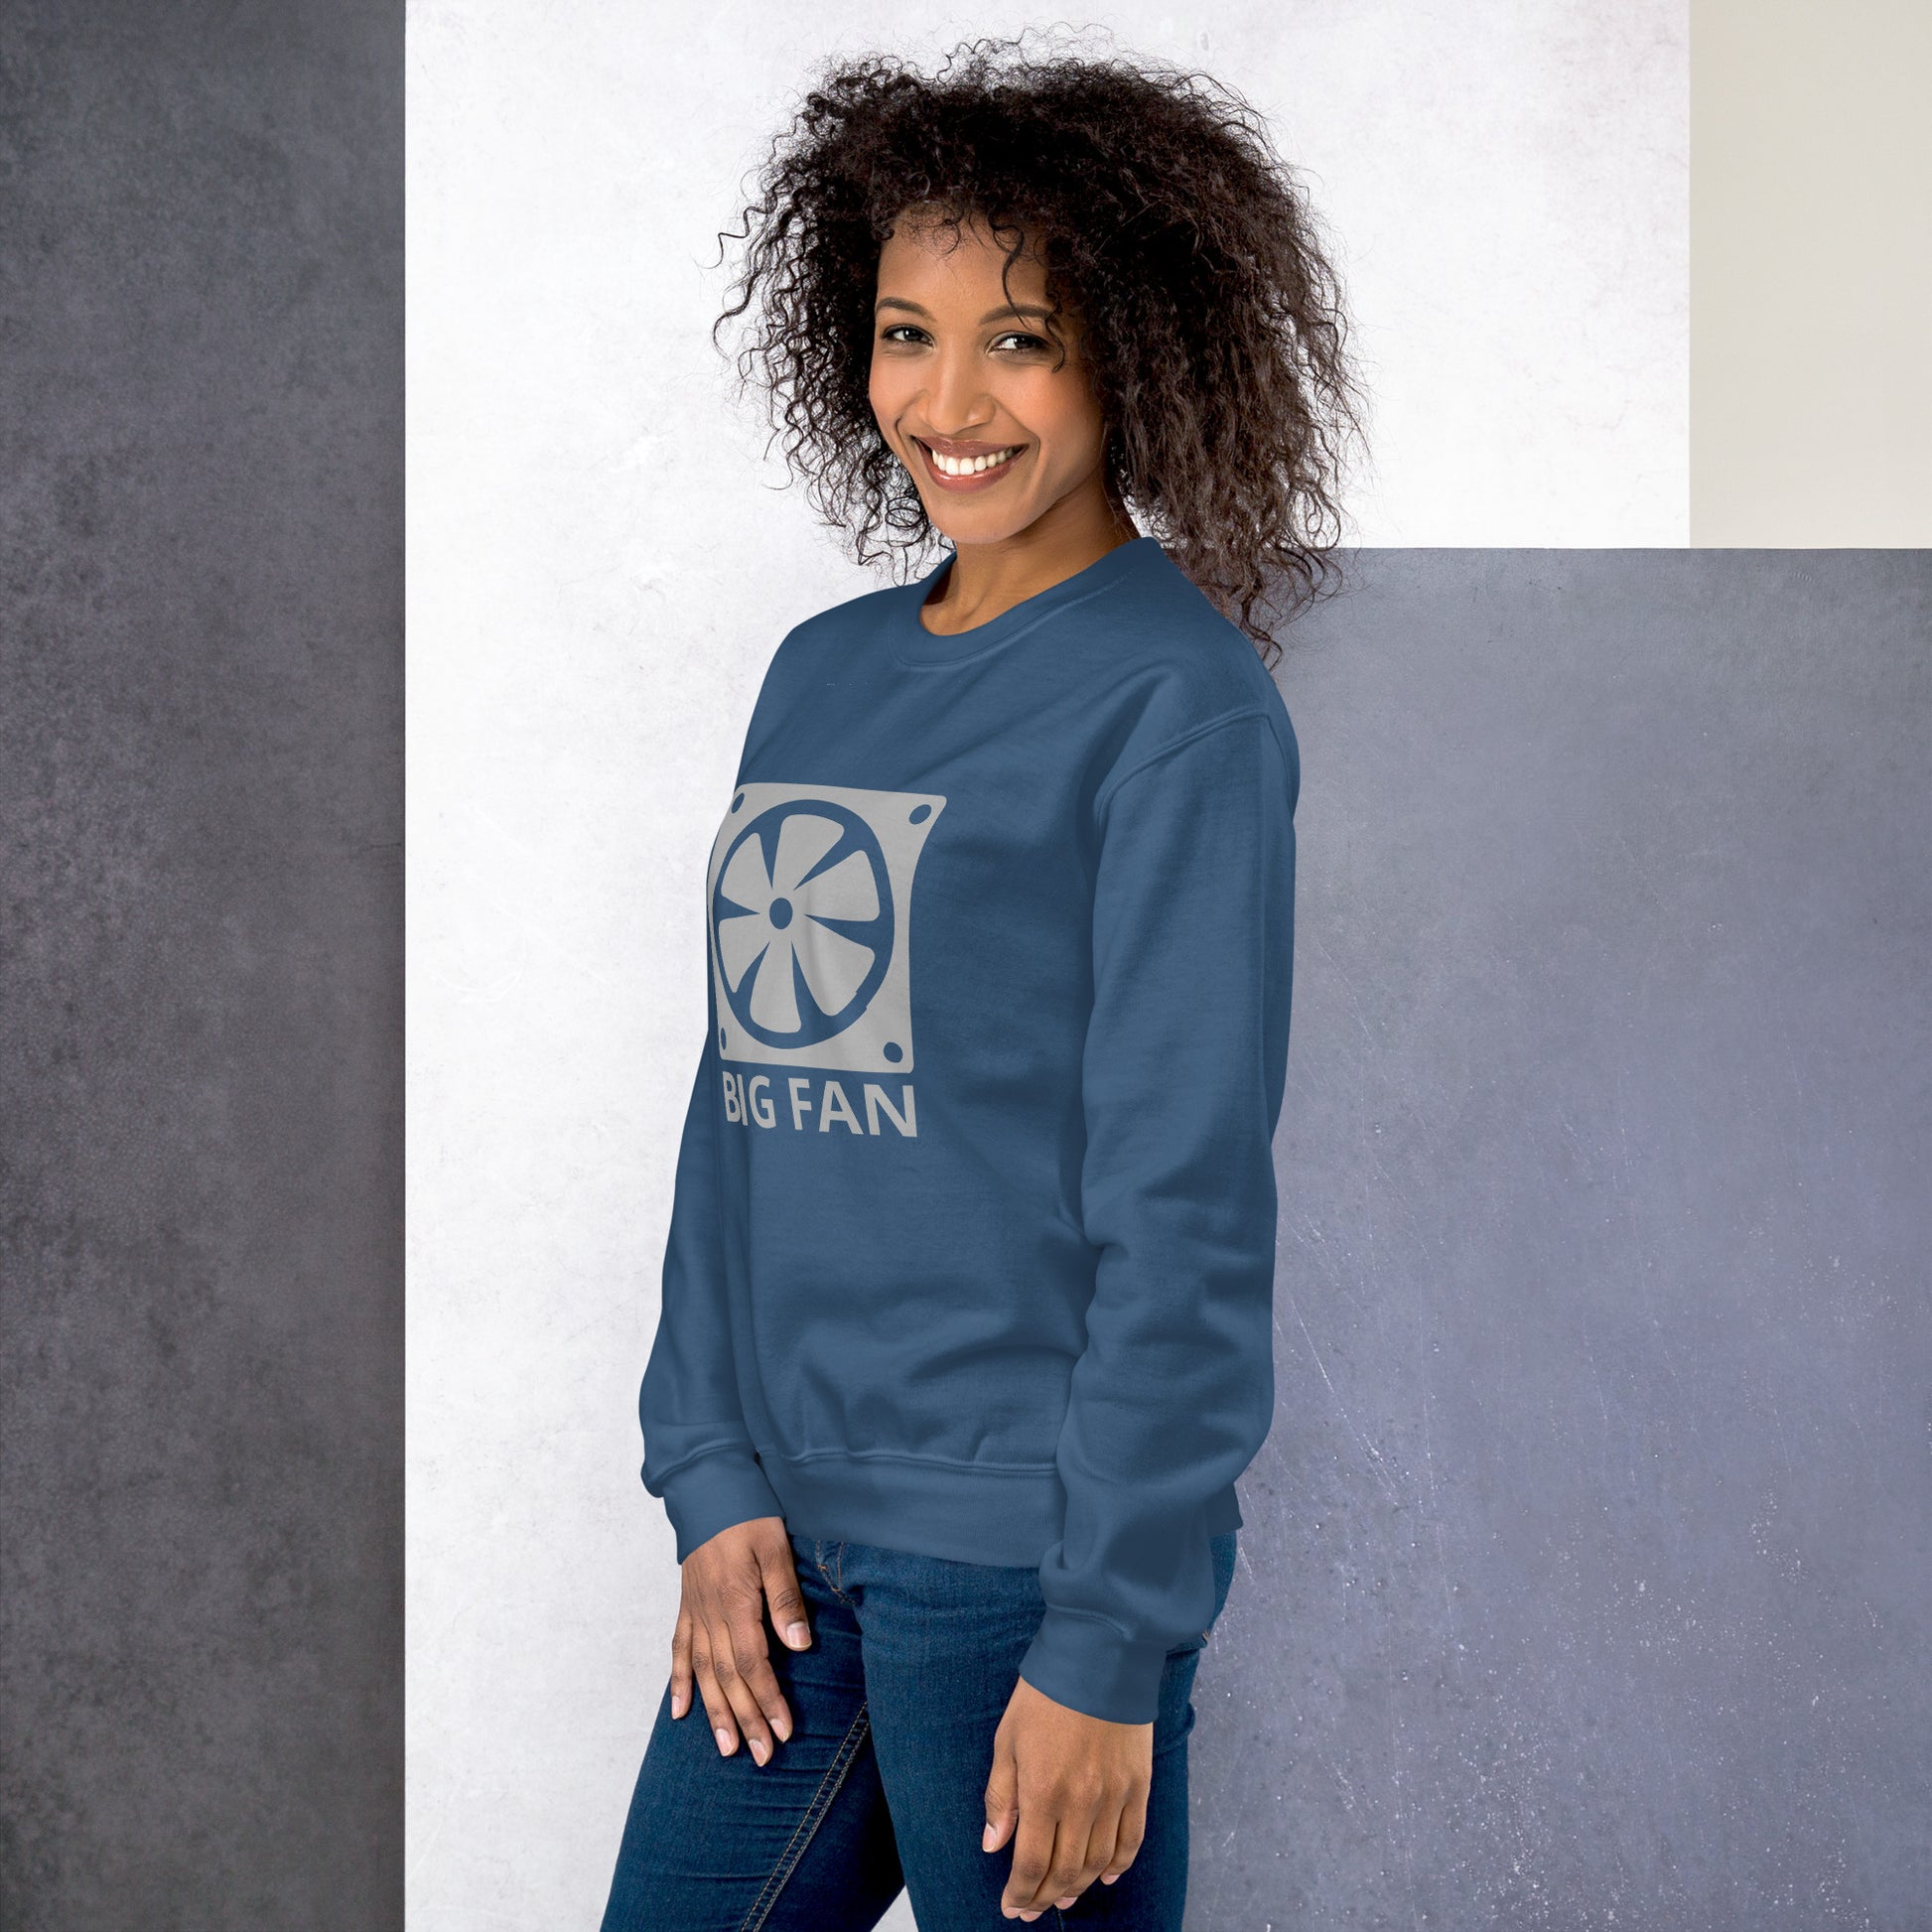 Women with indigo blue sweatshirt with image of a big computer fan and the text "BIG FAN"